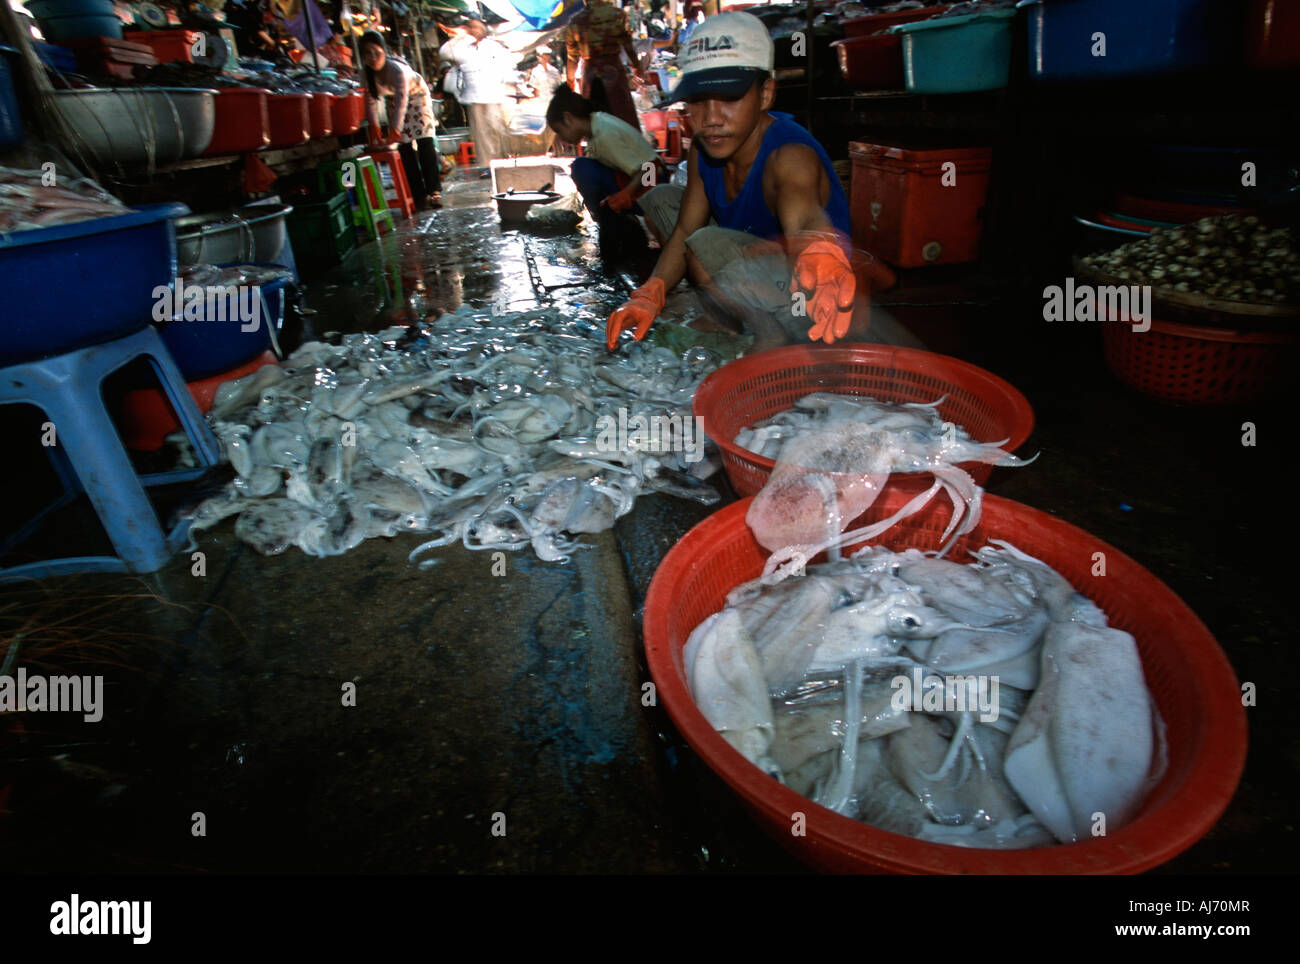 Squid and seafood for sale at a wet market in Phnom Penh, Cambodia. Stock Photo